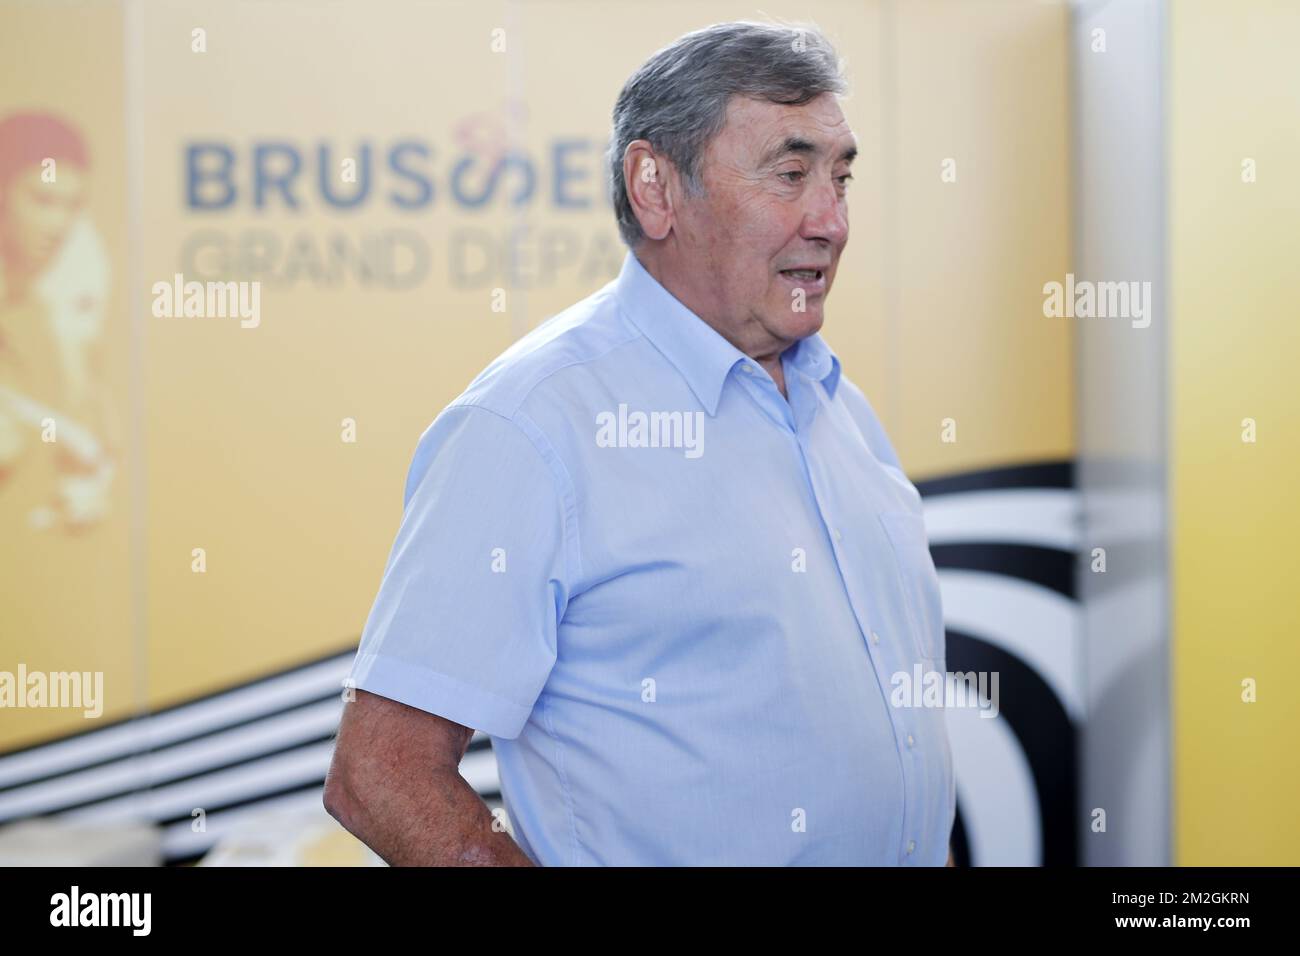 Former Belgian cyclist Eddy Merckx pictured before the start of the first stage of the 105th edition of the Tour de France cycling race, 201km from Noirmoutier-en-l'Ile to Fontenay-le-Comte, France, Saturday 07 July 2018. This year's Tour de France takes place from July 7th to July 29th. BELGA PHOTO YUZURU SUNADA Stock Photo